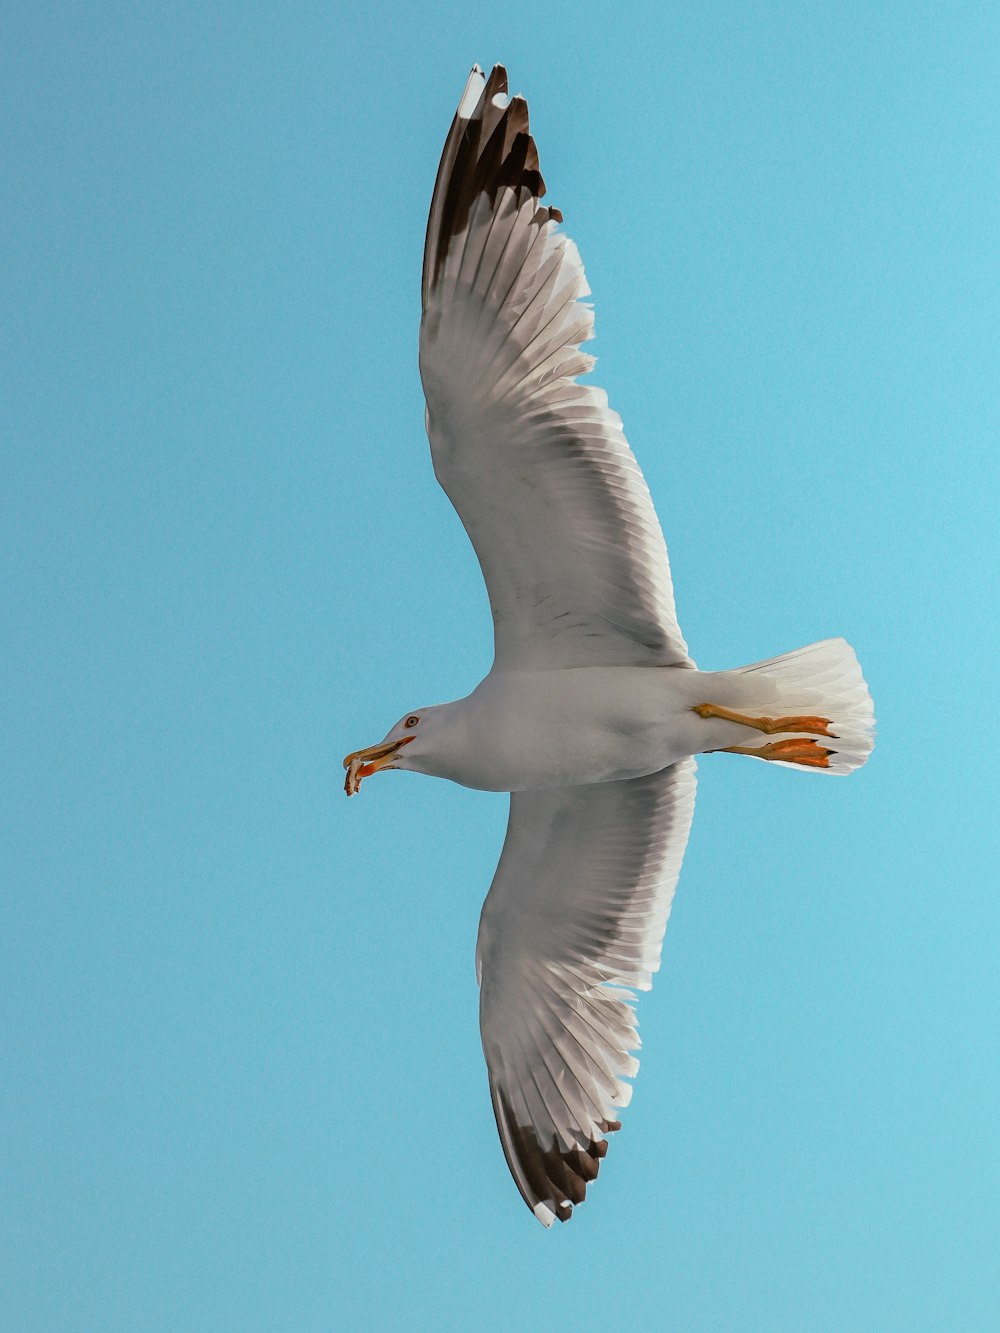 a seagull flying through a blue sky with its wings spread